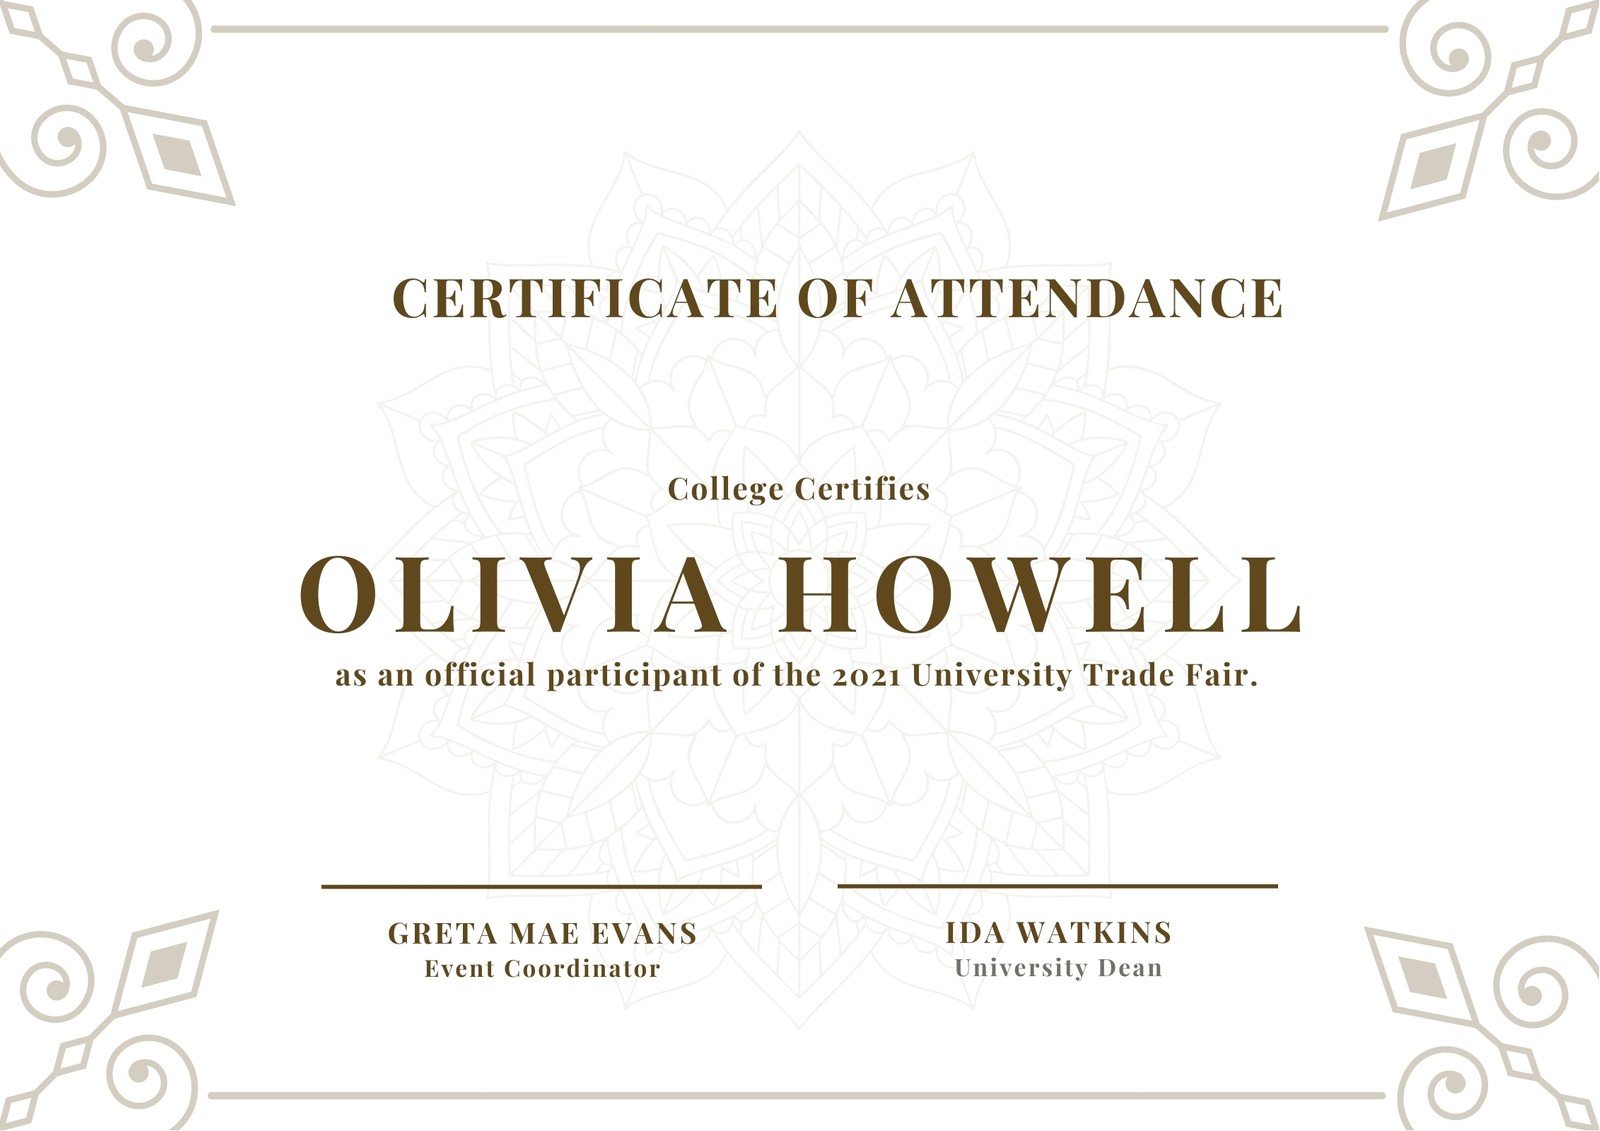 Customize 22+ Attendance Certificates Templates Online - Canva For Conference Certificate Of Attendance Template